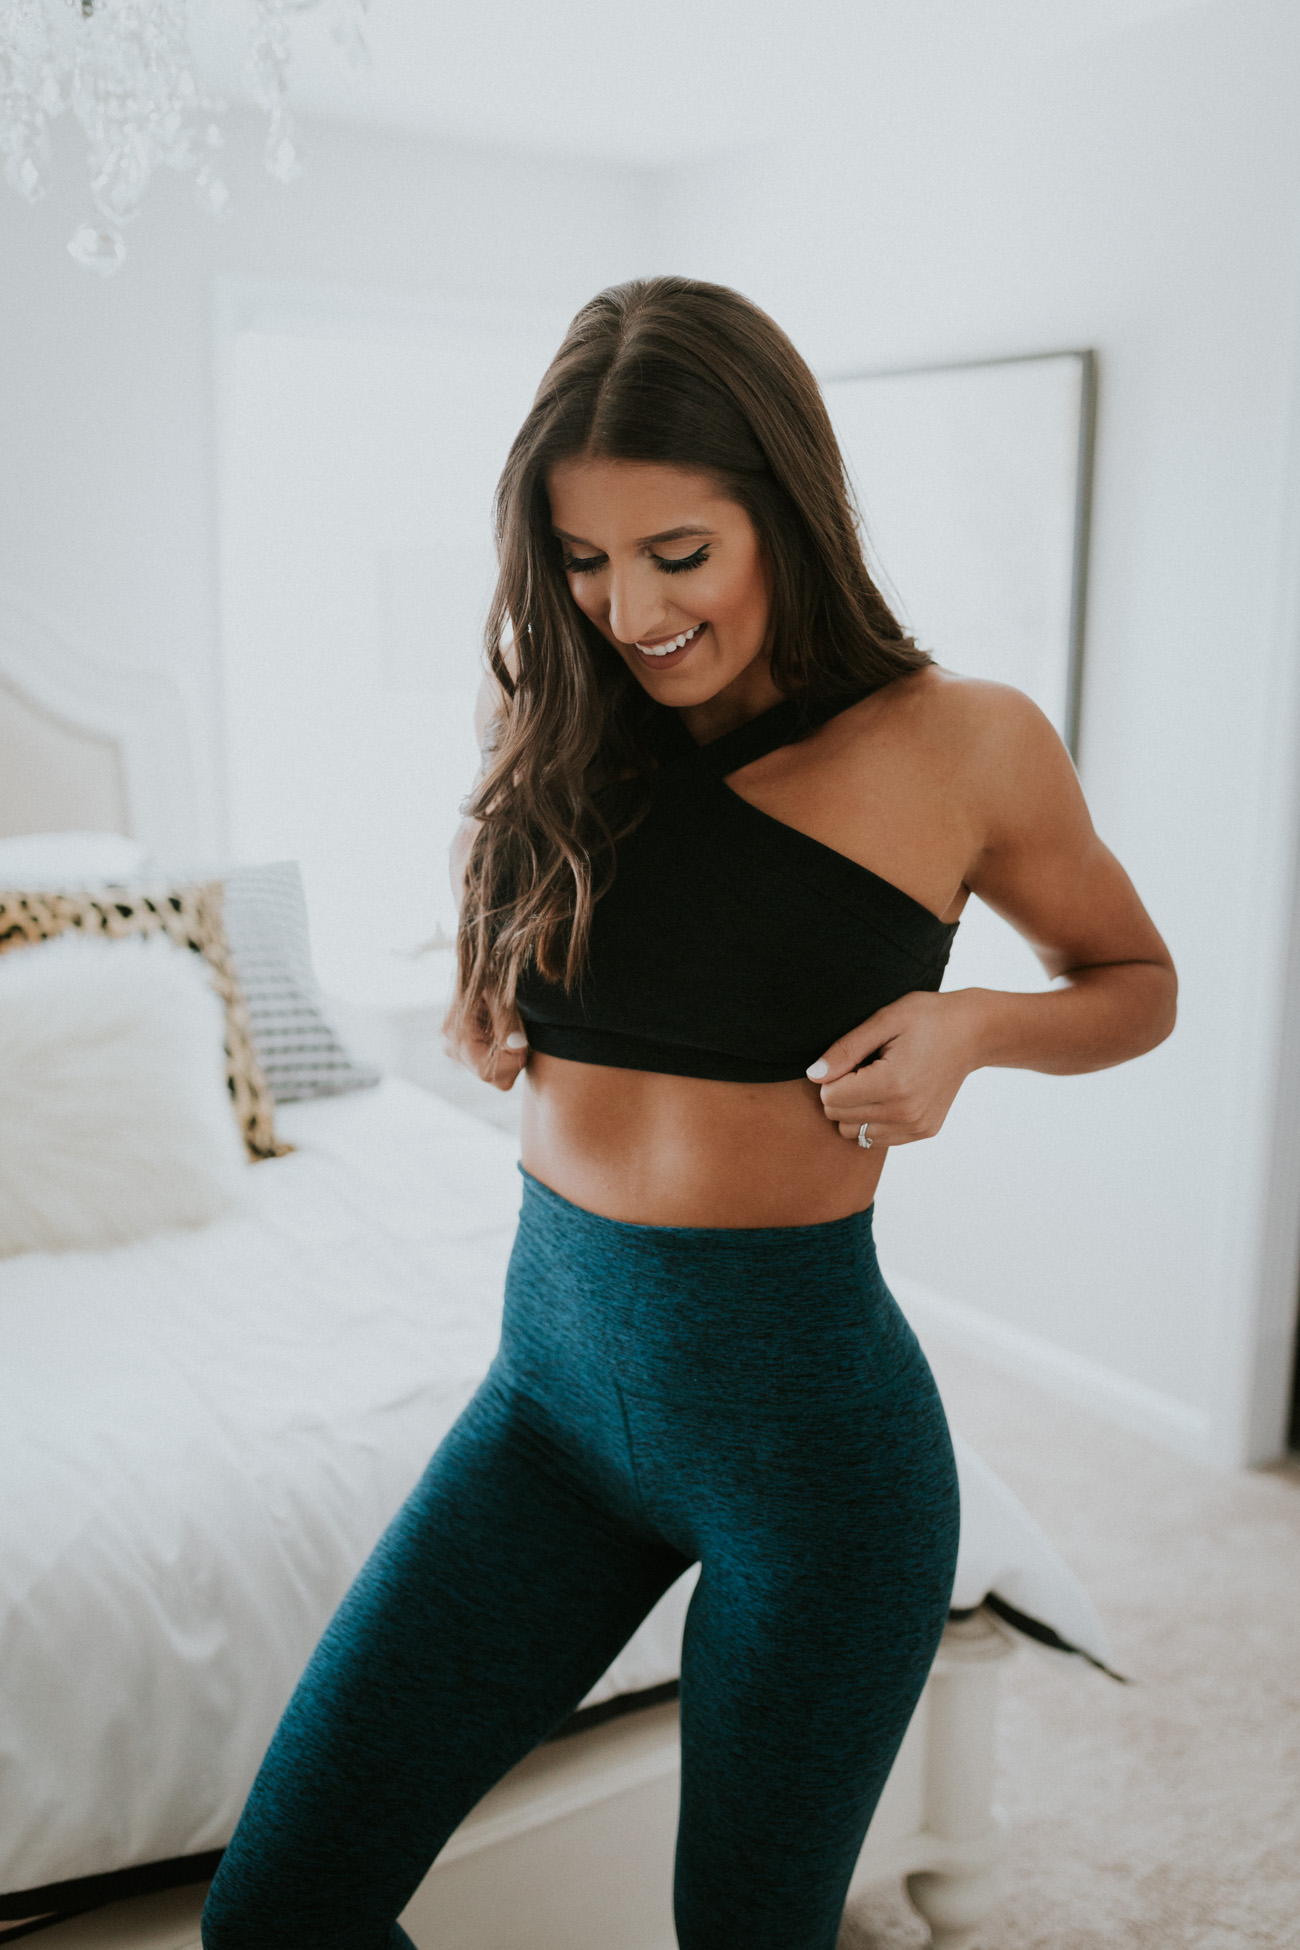 empowered media, jillian michaels app, fitness apps, fitness guides, workout apps, workout guides, best fitness apps, beyond yoga sports bra, beyond yoga spacedye leggings, fit with asd, fitwithasd, a southern drawl fitness // grace wainwright a southern drawl